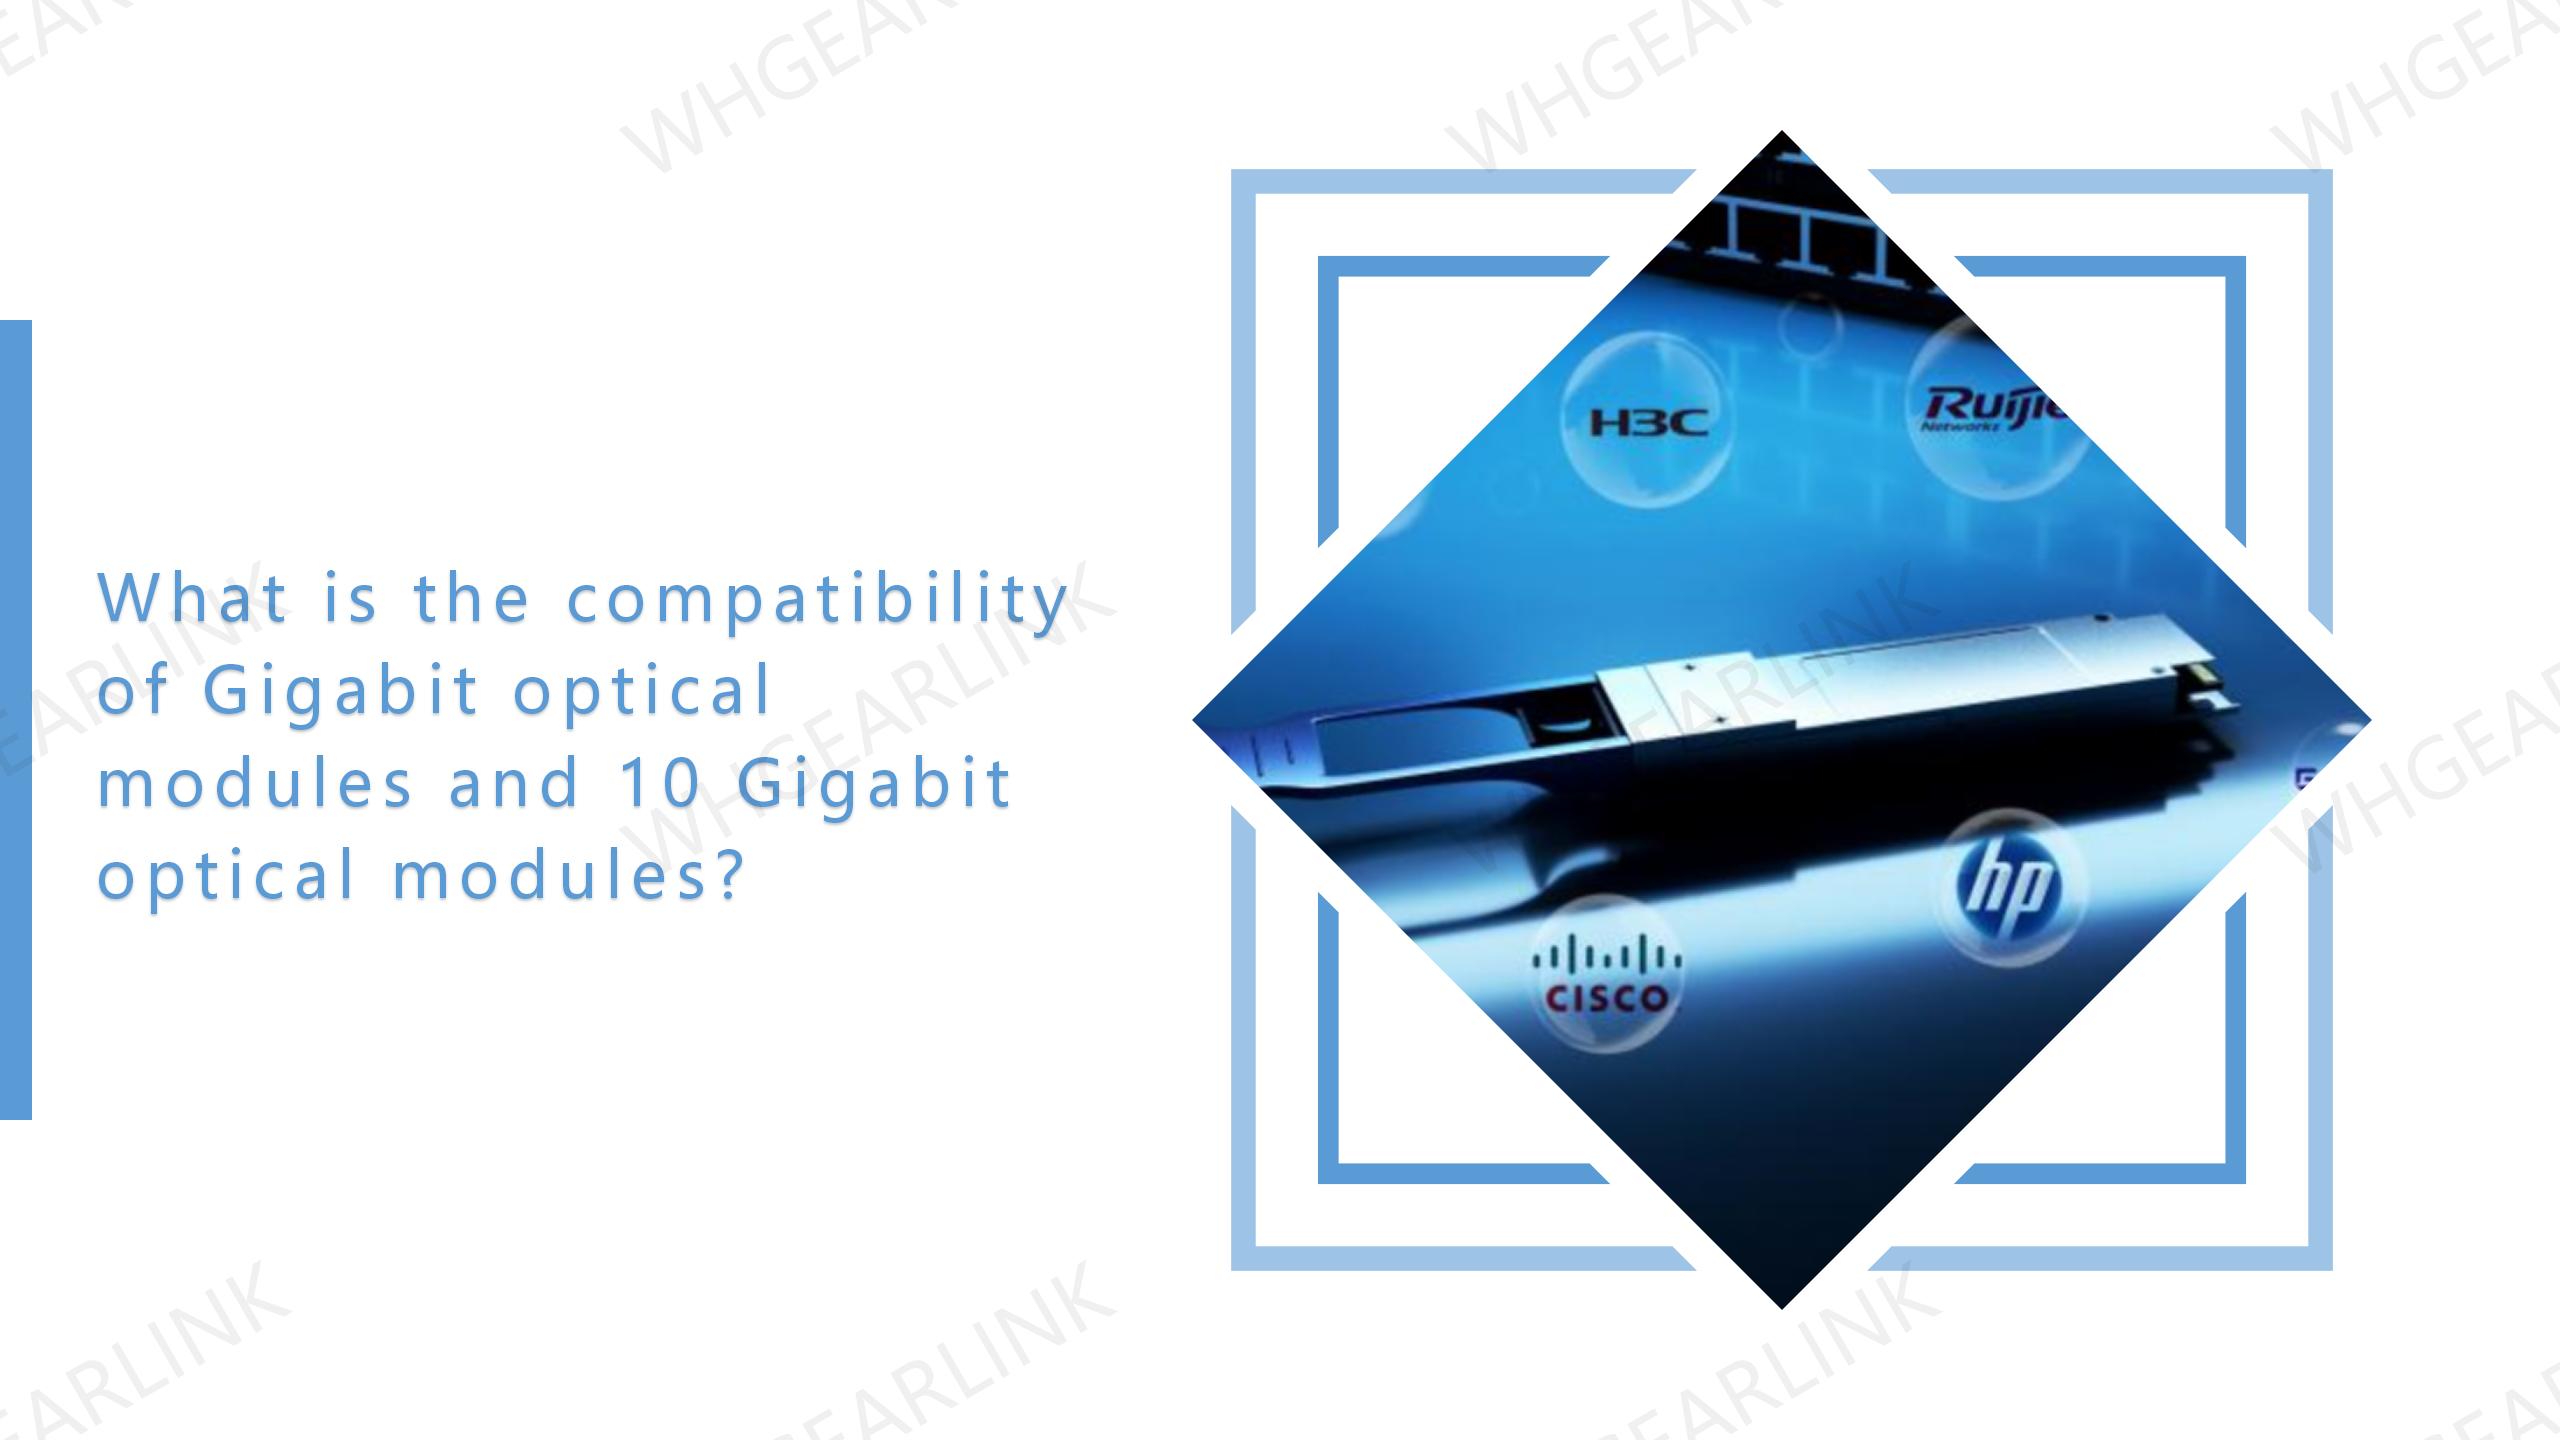 What is the compatibility of Gigabit optical modules and 10 Gigabit optical modules?